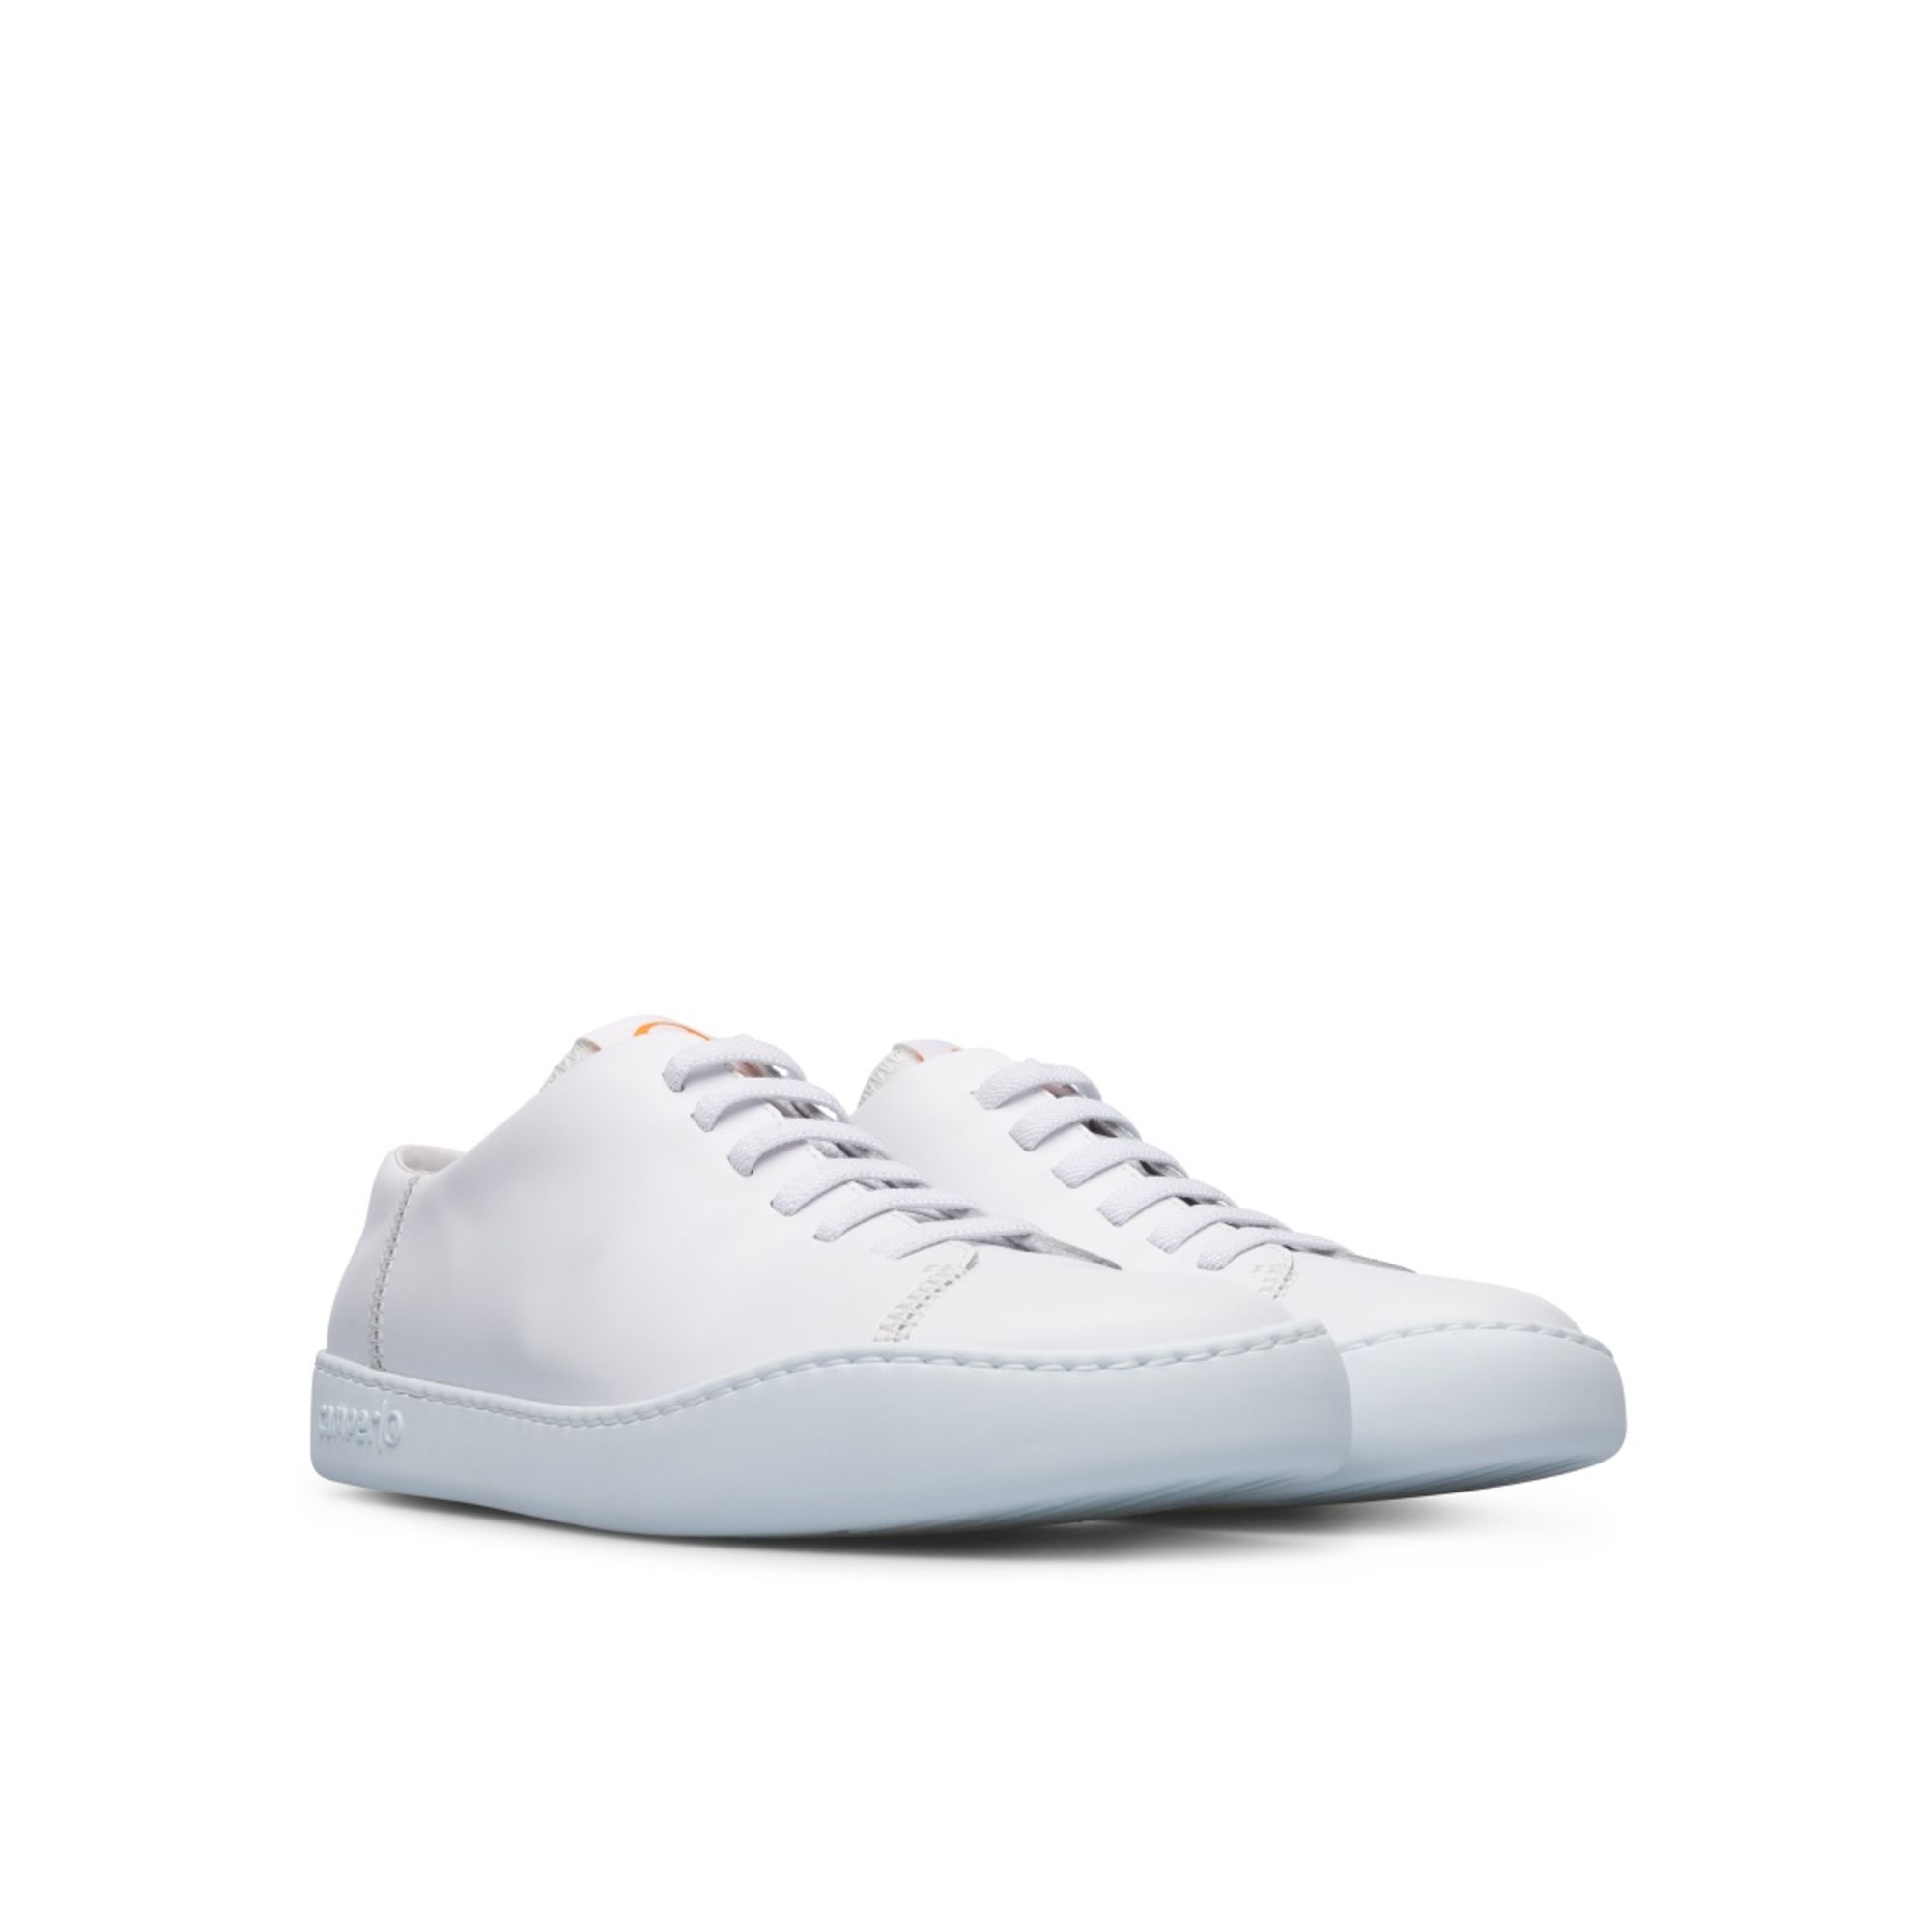 White low-top leather and textile men's sneakers.

Peu Touring is a sportier and more contemporary version of our iconic Peu, enhanced with technical upgrades and a recognizable curve on the outsole.